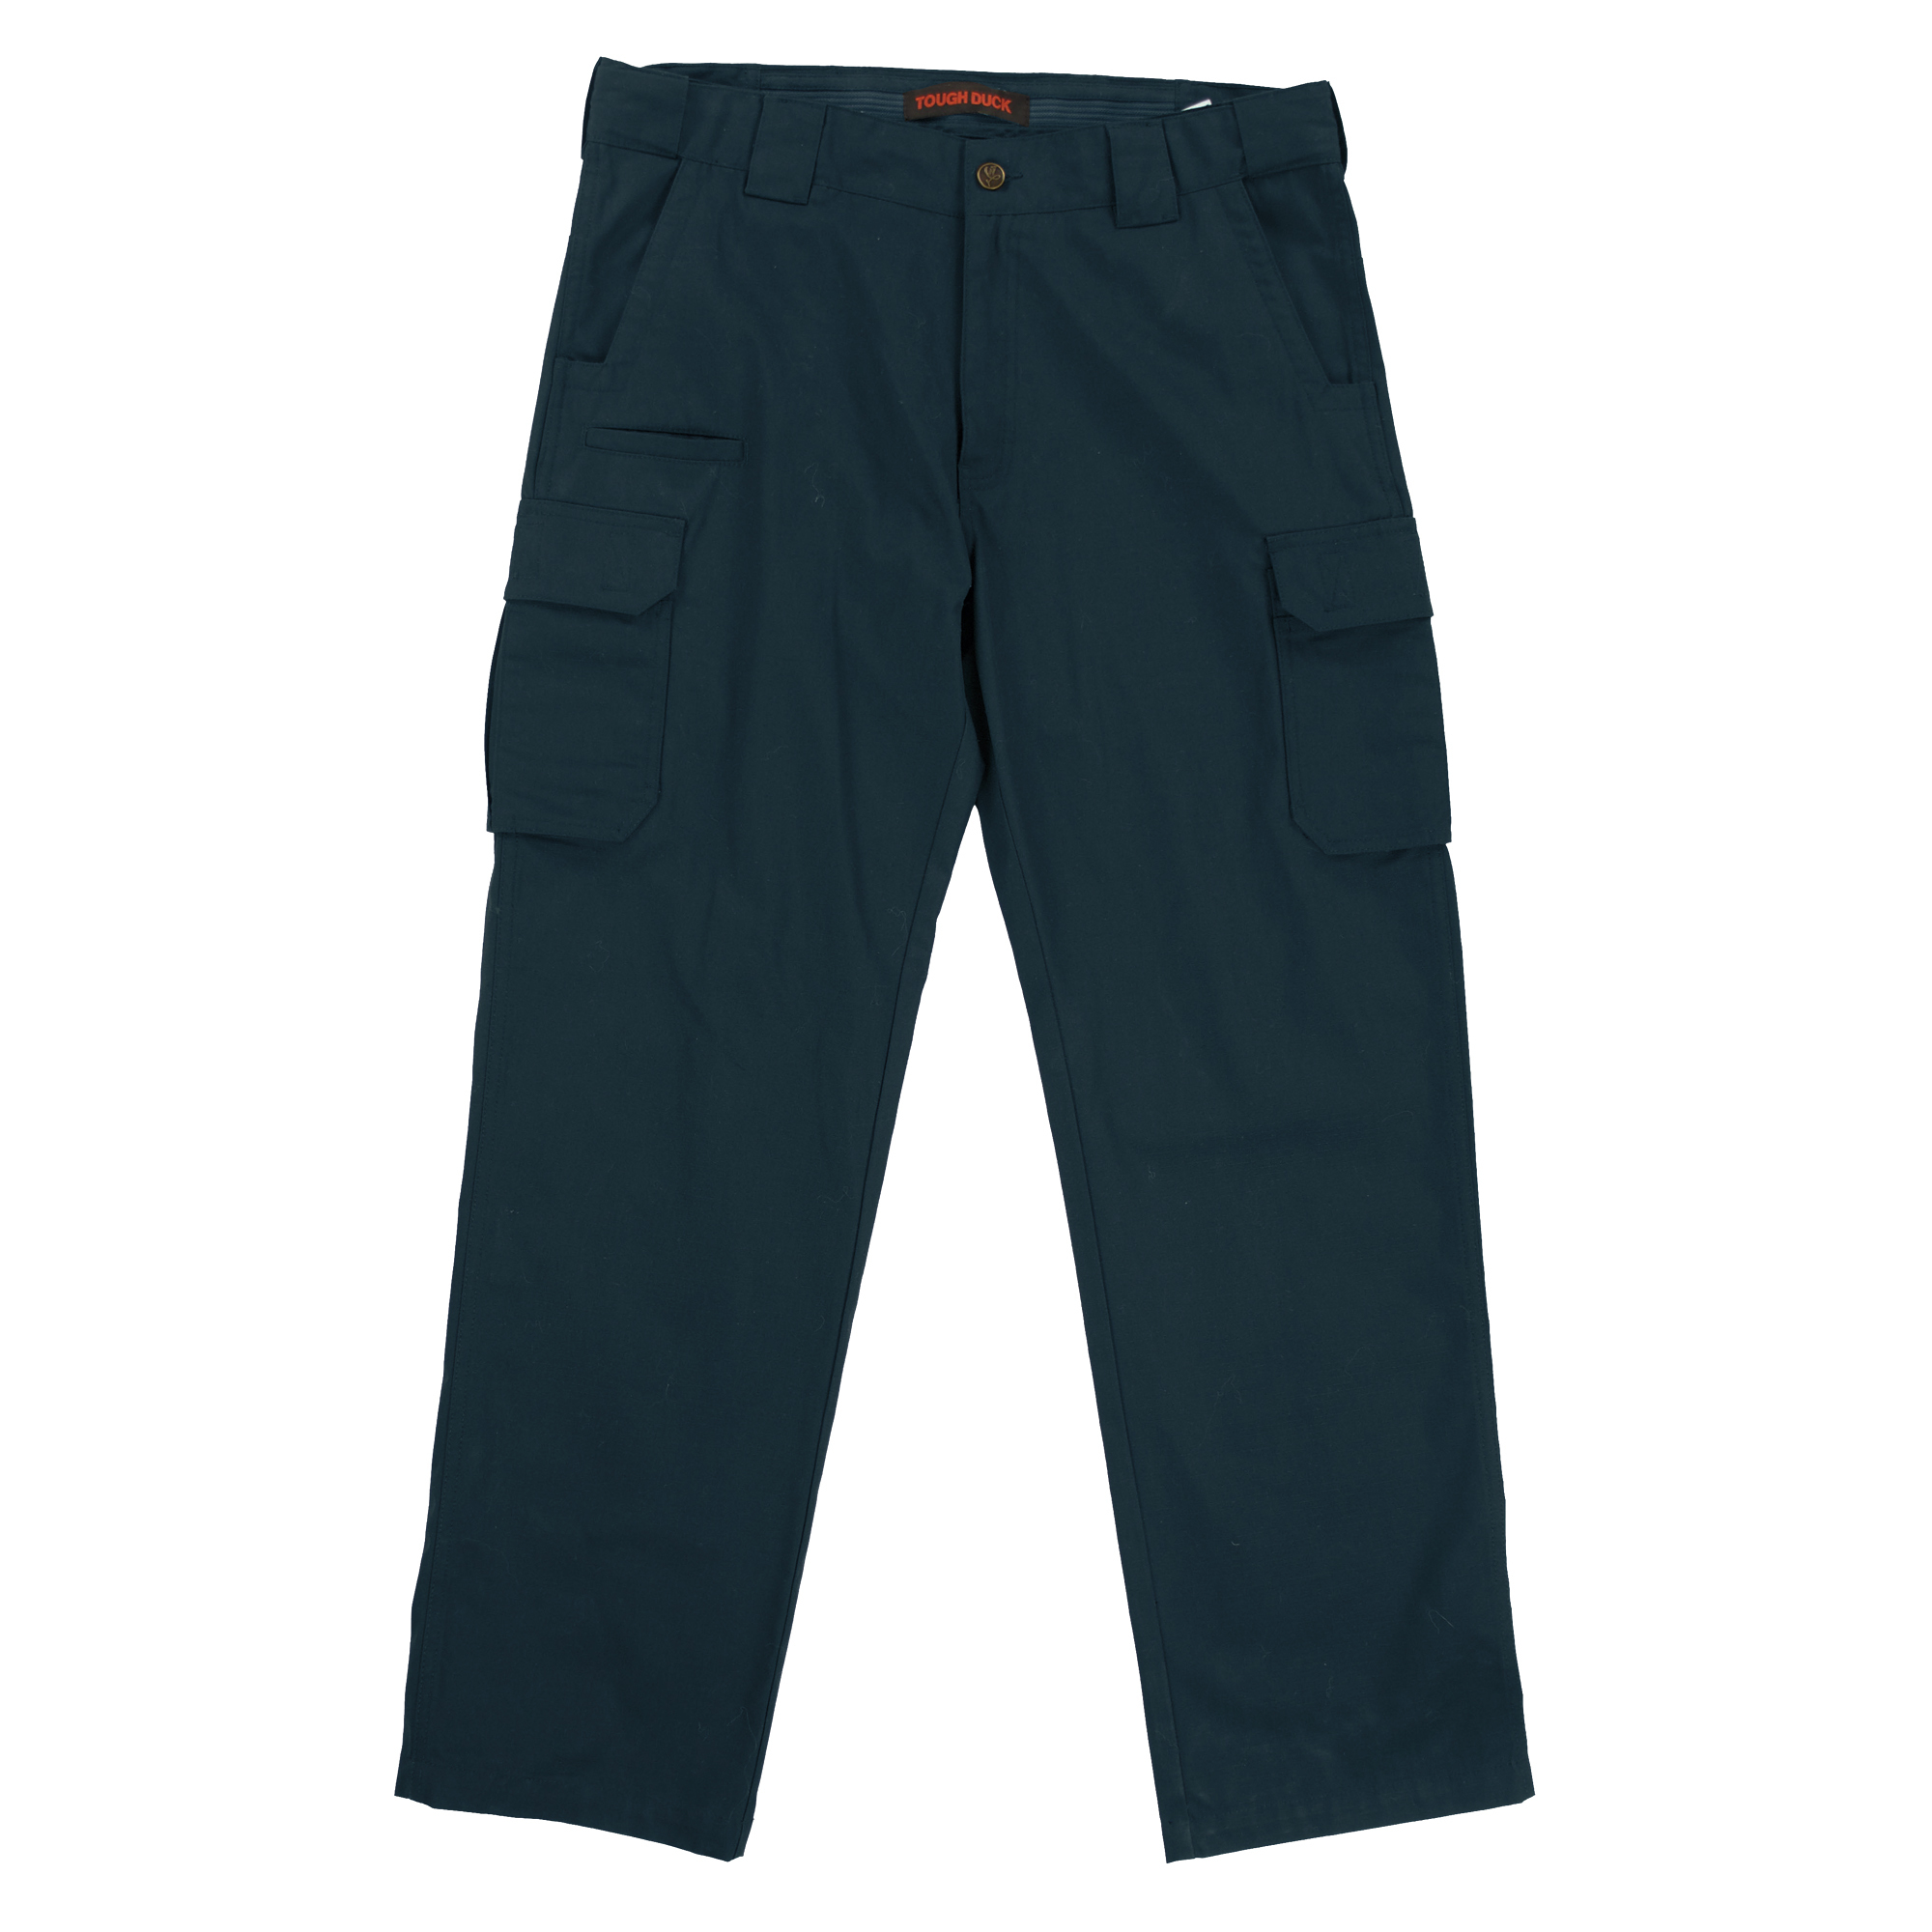 Tough Duck, Ripstop Cargo Pant, Waist 36 in, Inseam 30 in, Color Navy, Model WP110